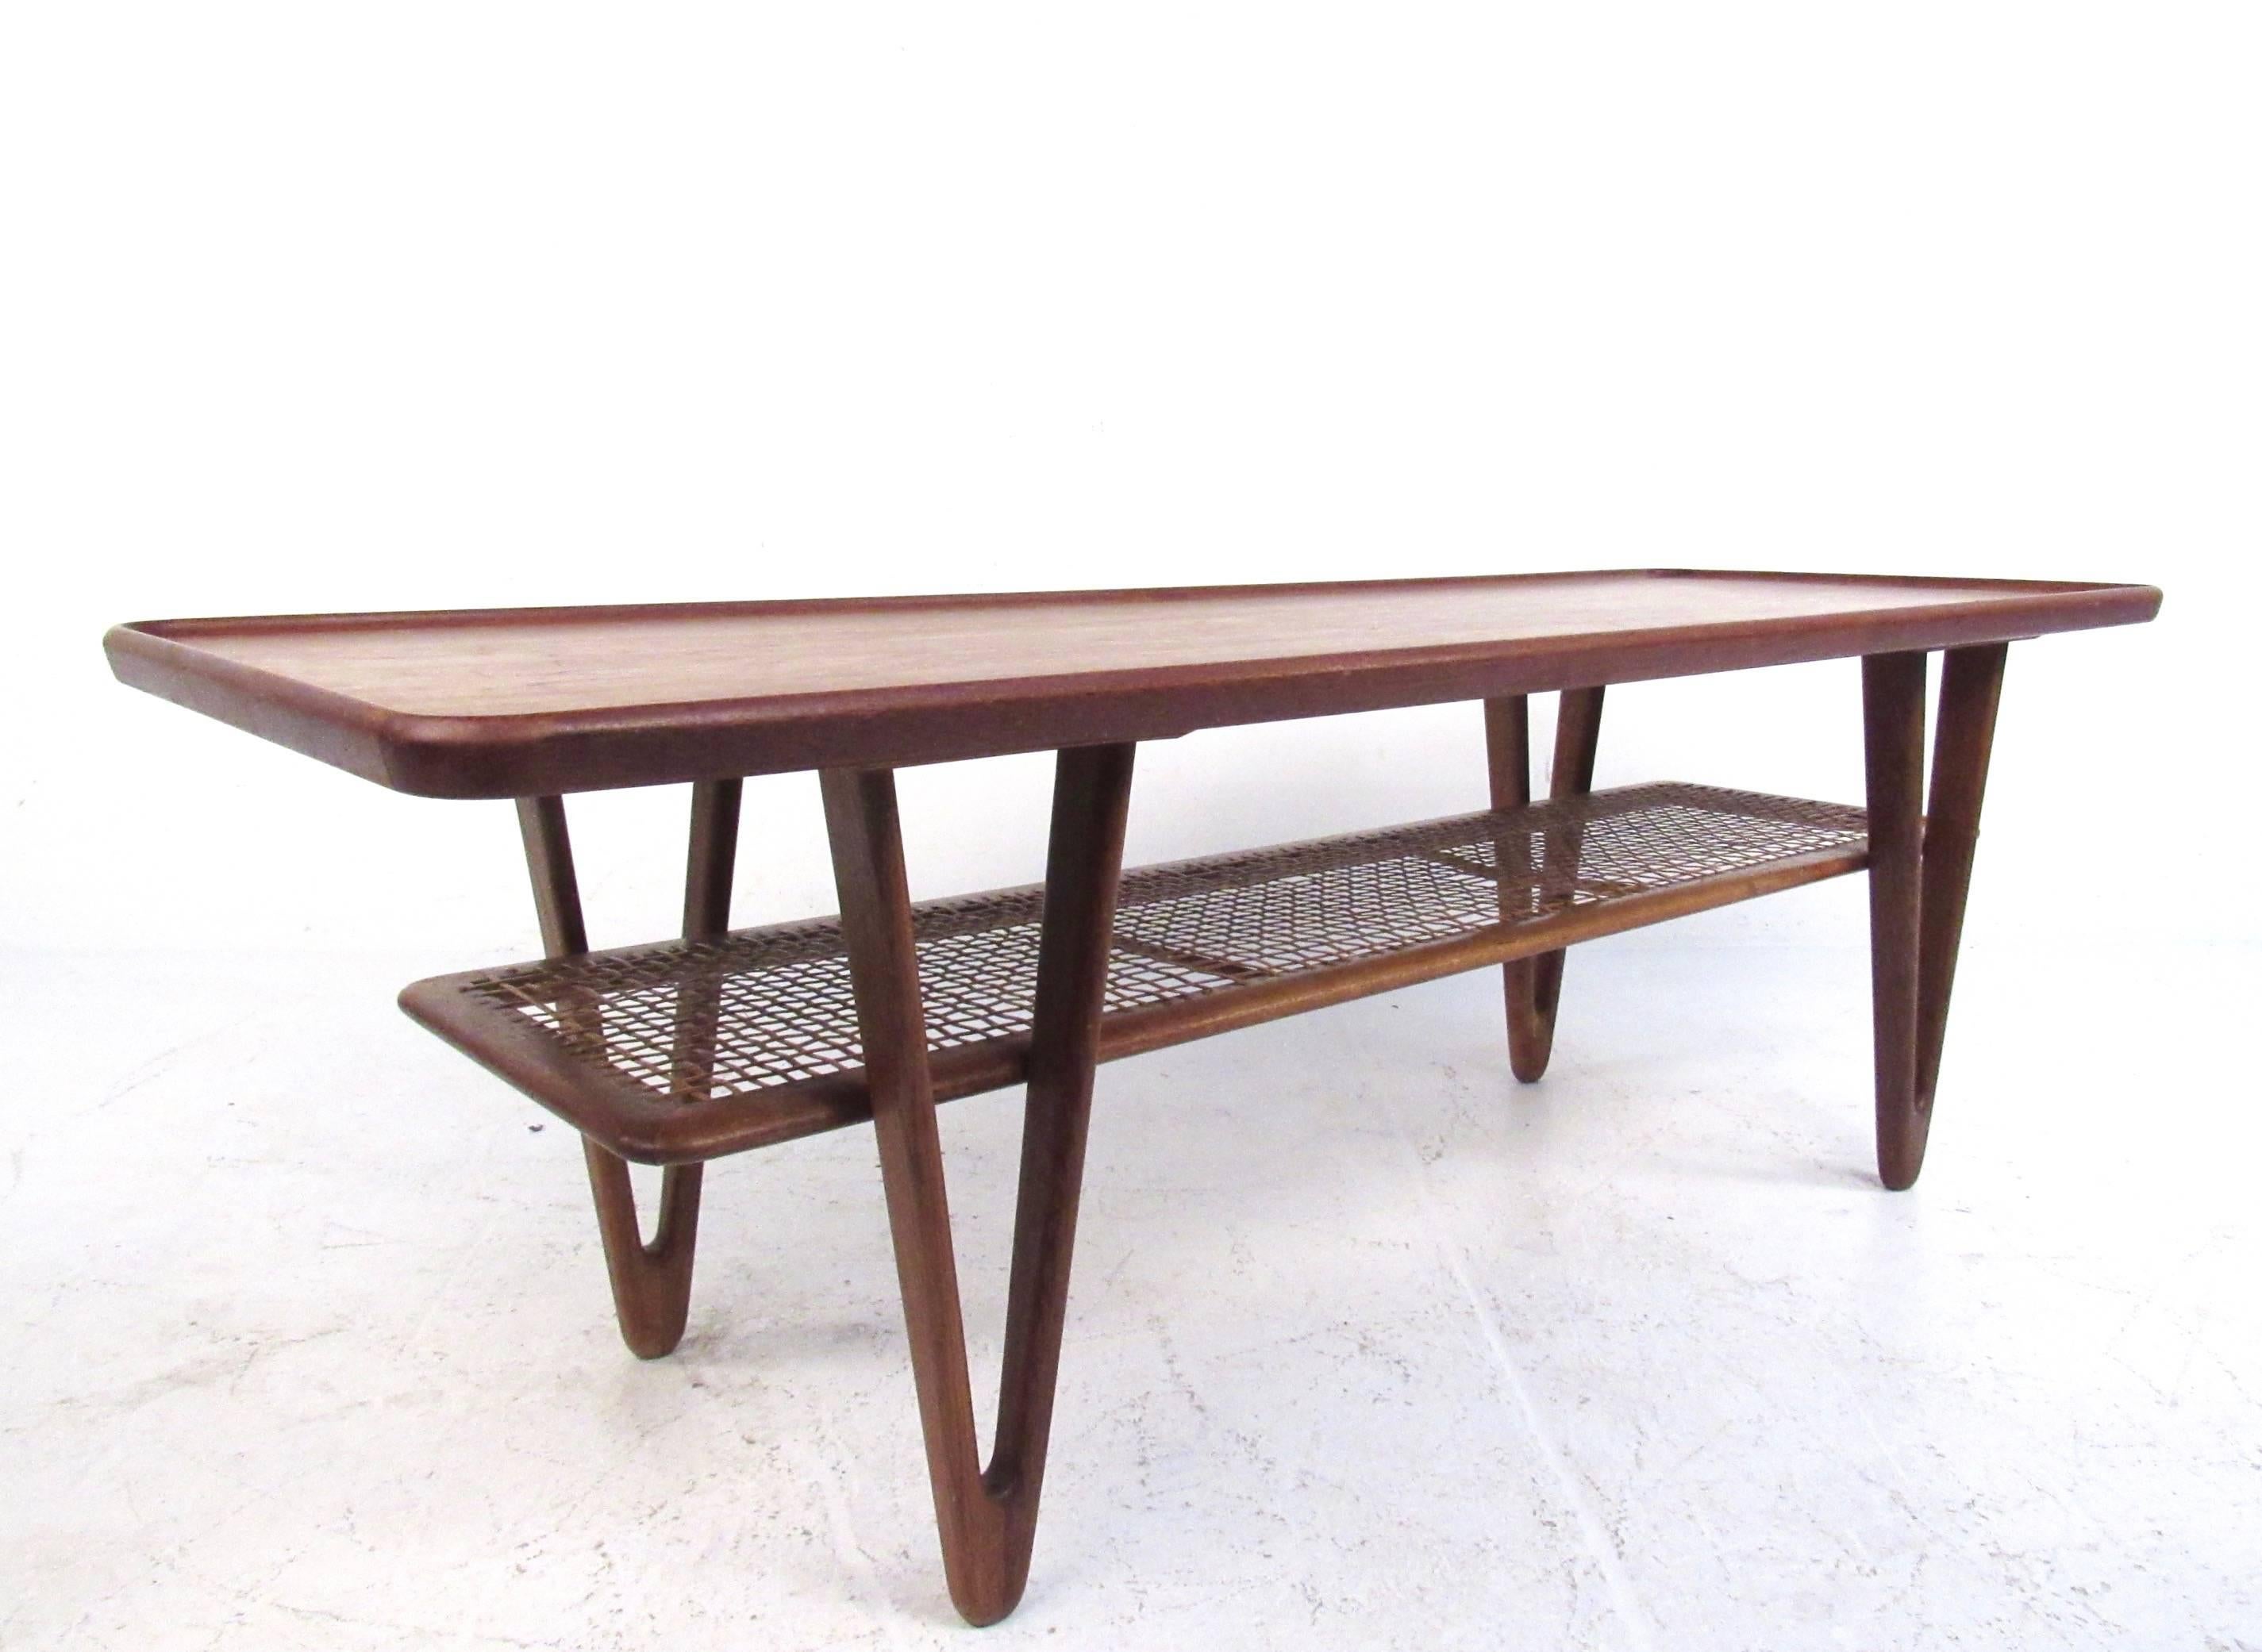 This stunning sculpted coffee table features unique triangular legs with second tier cane shelf. Raised edge teak top showcases the beautiful attention to detail paid by Kurt Ostervig in his iconic Mid-Century Modern designs. Stylish Mid-Century